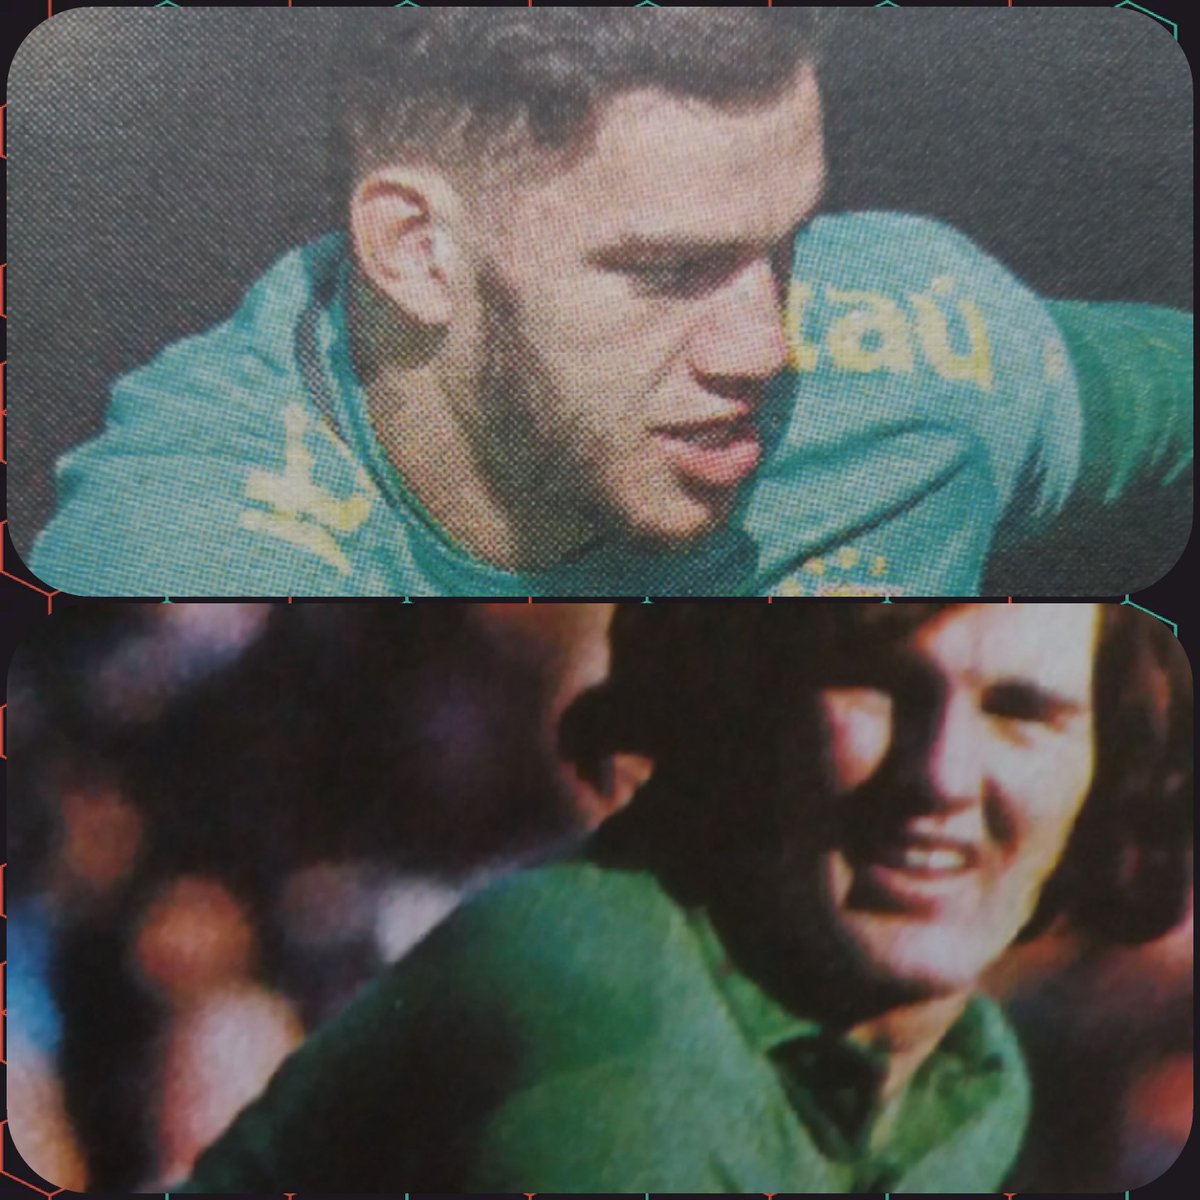 #2 in the series looks at two goalkeepers, EDERSON and JOE CORRIGAN in a position that has perhaps changed more than any other. With  @exohms  https://downthekippaxsteps.blogspot.com/2020/04/head-to-head.html